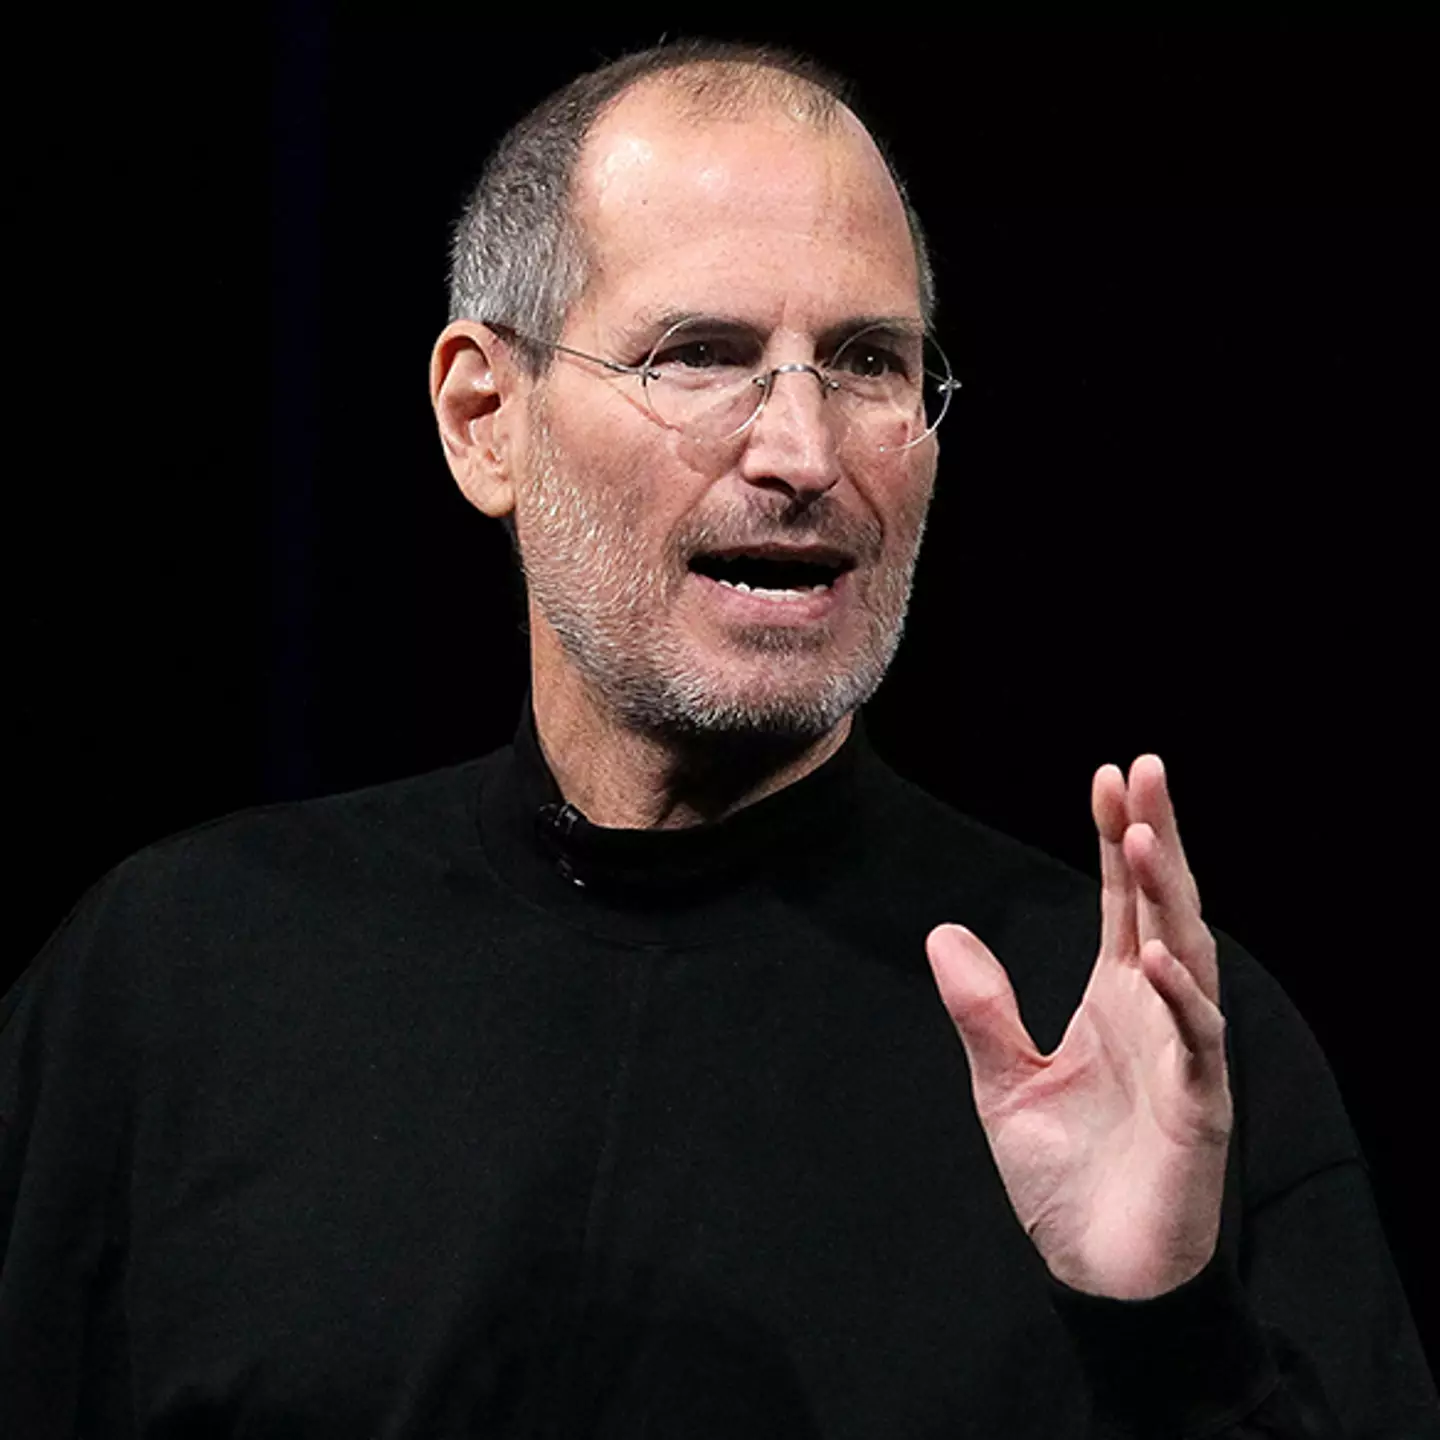 Reason why Steve Jobs adopted bizarre habit of soaking his feet in the toilet water of Apple restrooms